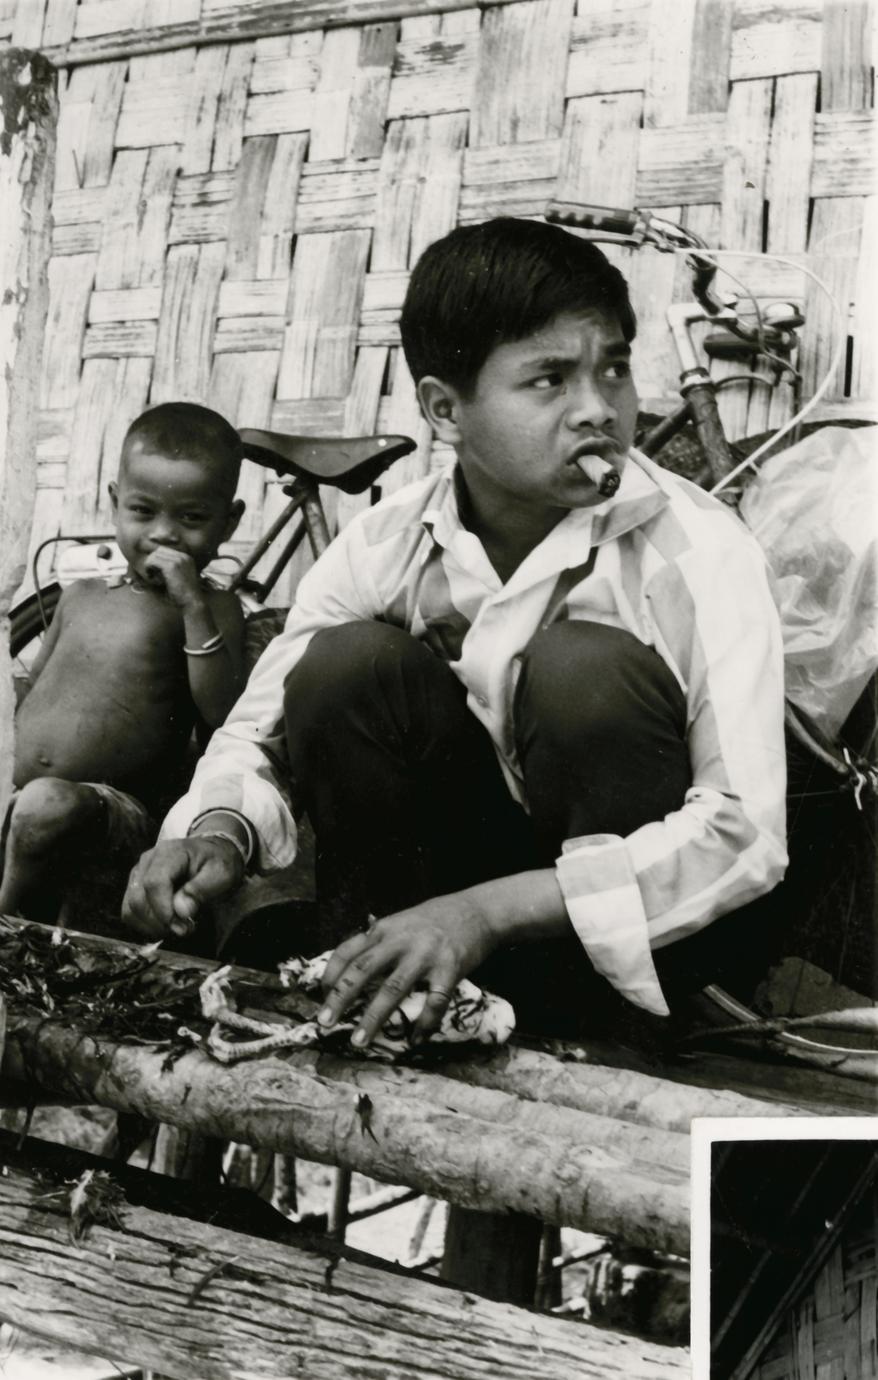 A Nyaheun boy plucks a chicken on his porch in Attapu Province